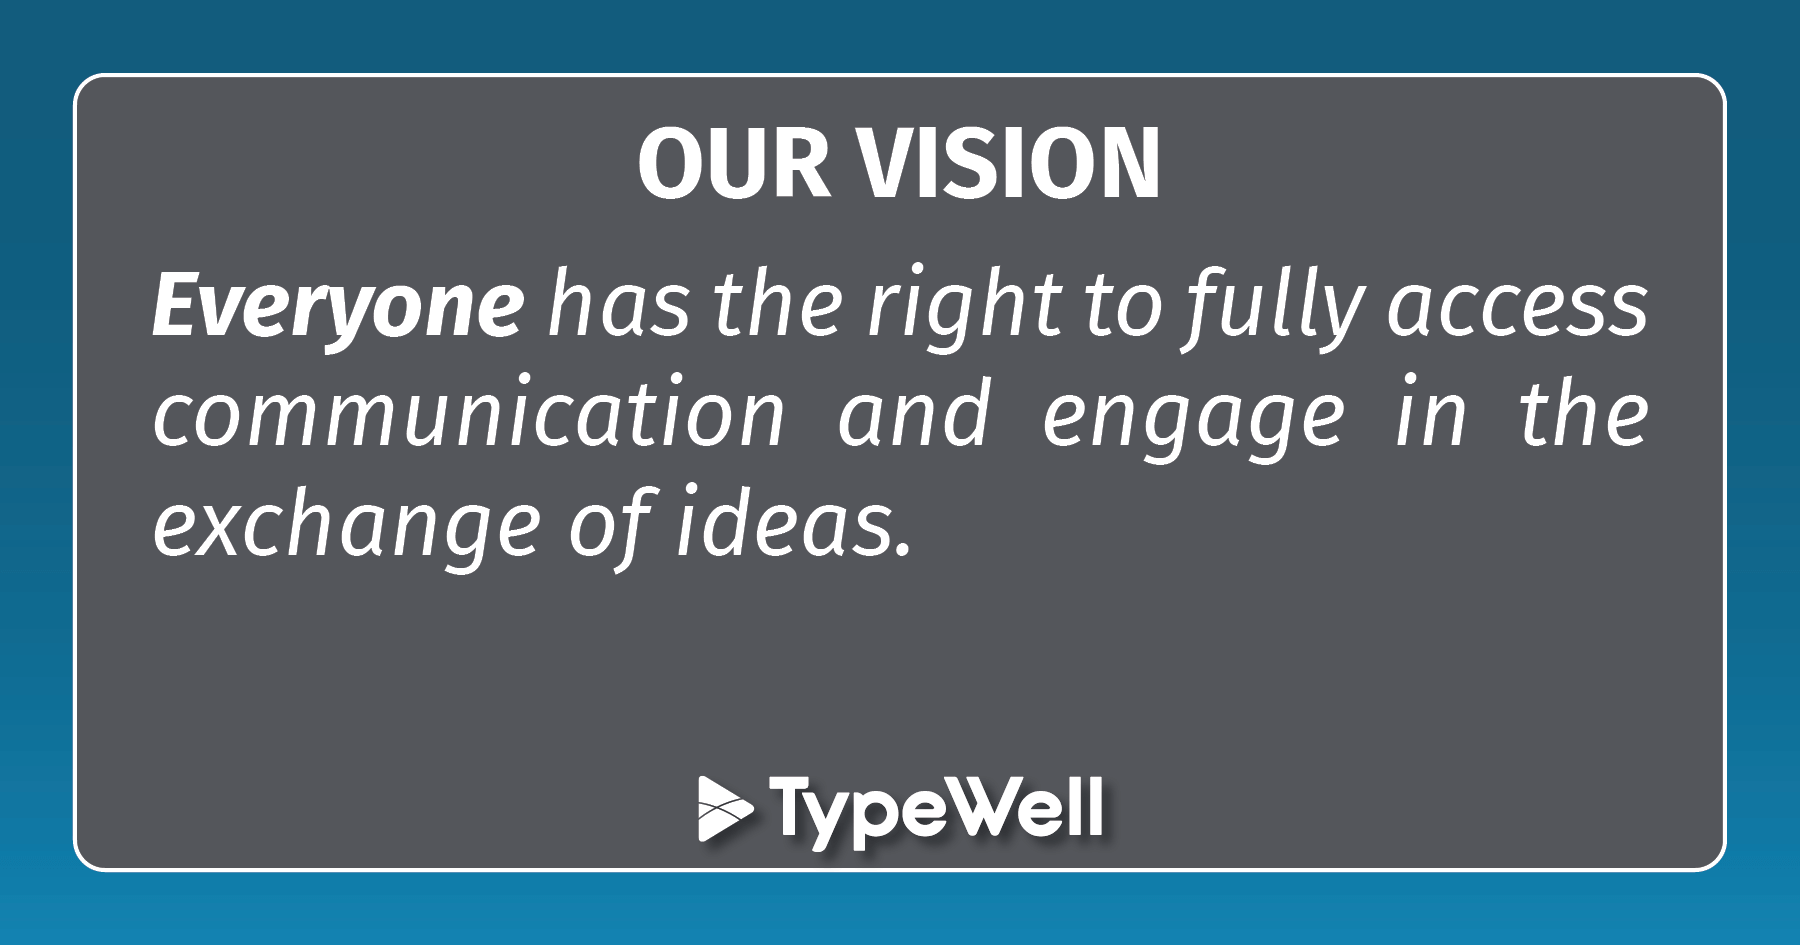 OUR VISION: Everyone has the right to fully access communication and engage in the exchange of ideas.